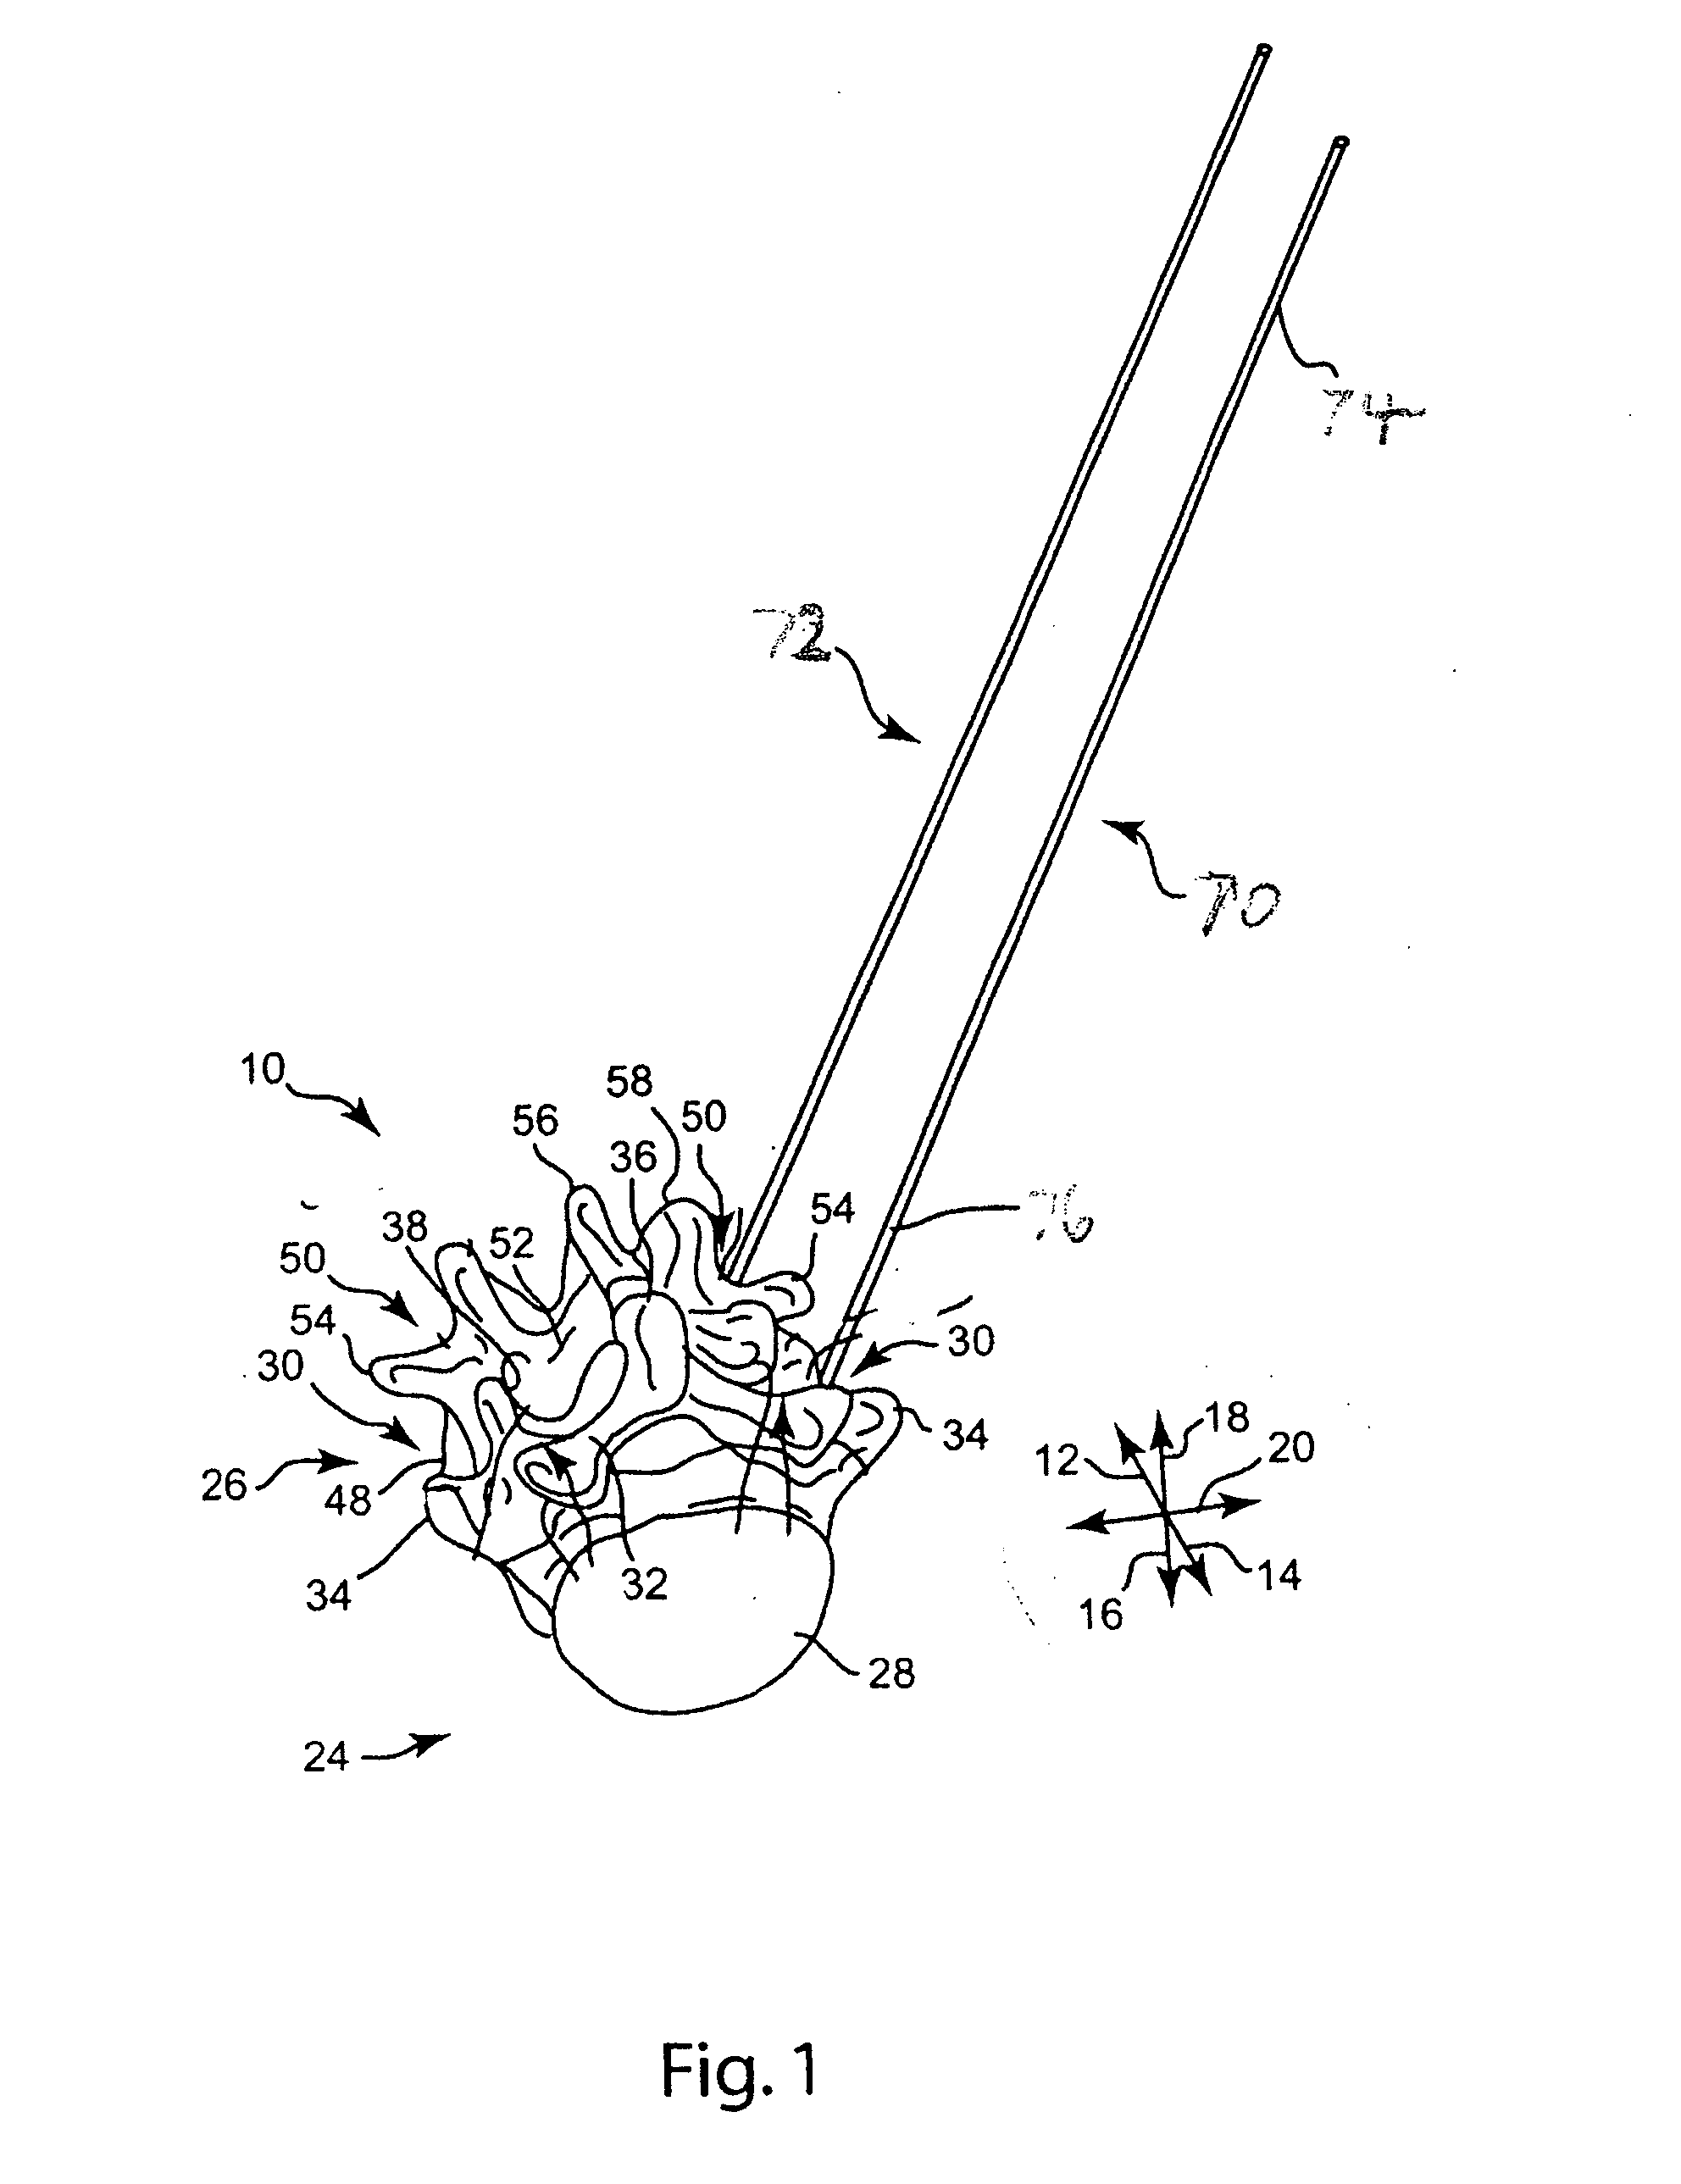 Rod contouring apparatus and method for percutaneous pedicle screw extension